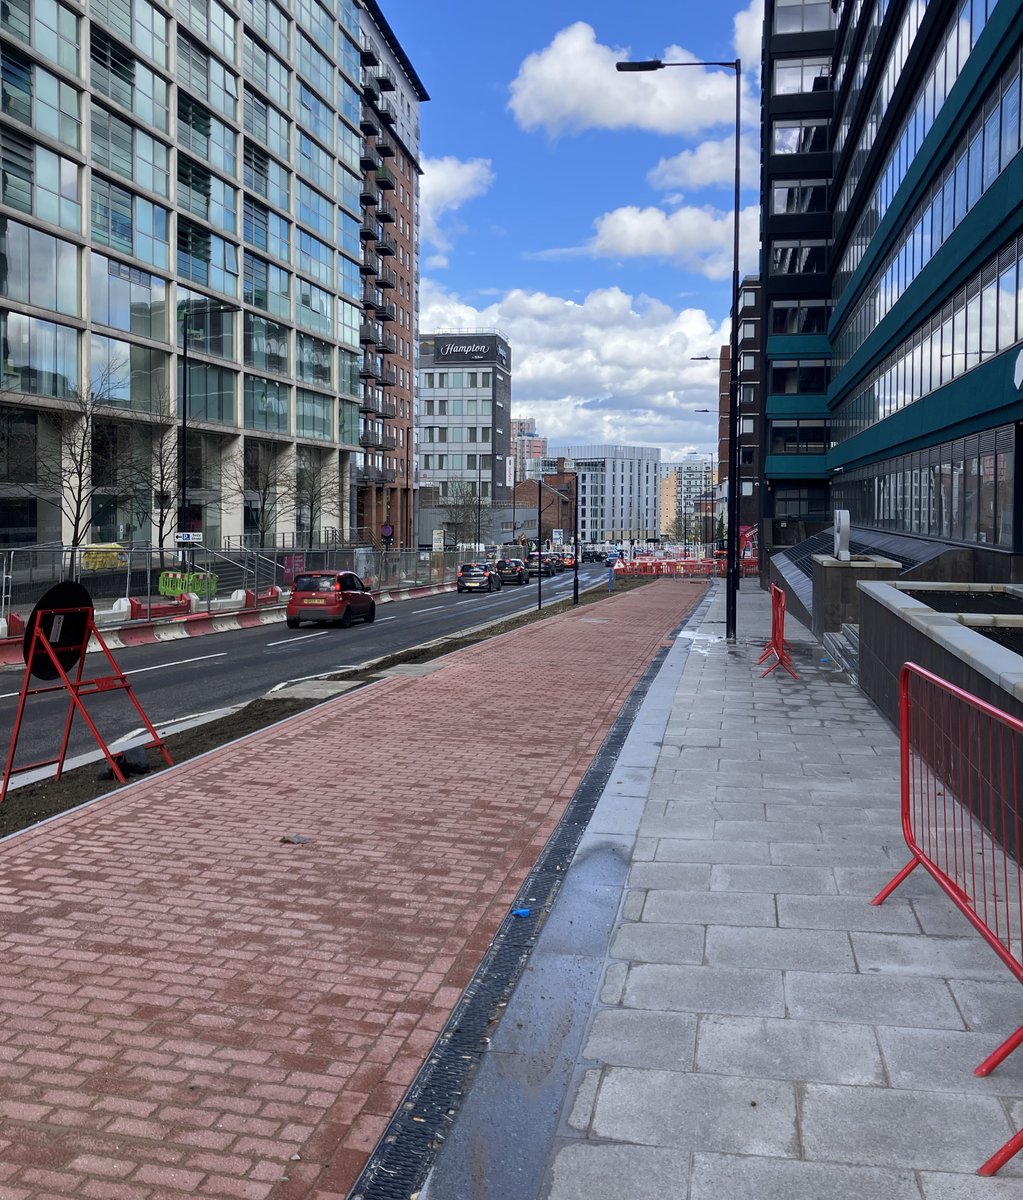 It's great to see the progress with new pavements and cycle at West Bar. Better walking and cycling routes are being created between West Bar, Kelham Island & Sheffield city centre. Our scheme involves footpath widening, new cycle routes and new Grey to Green landscaping.